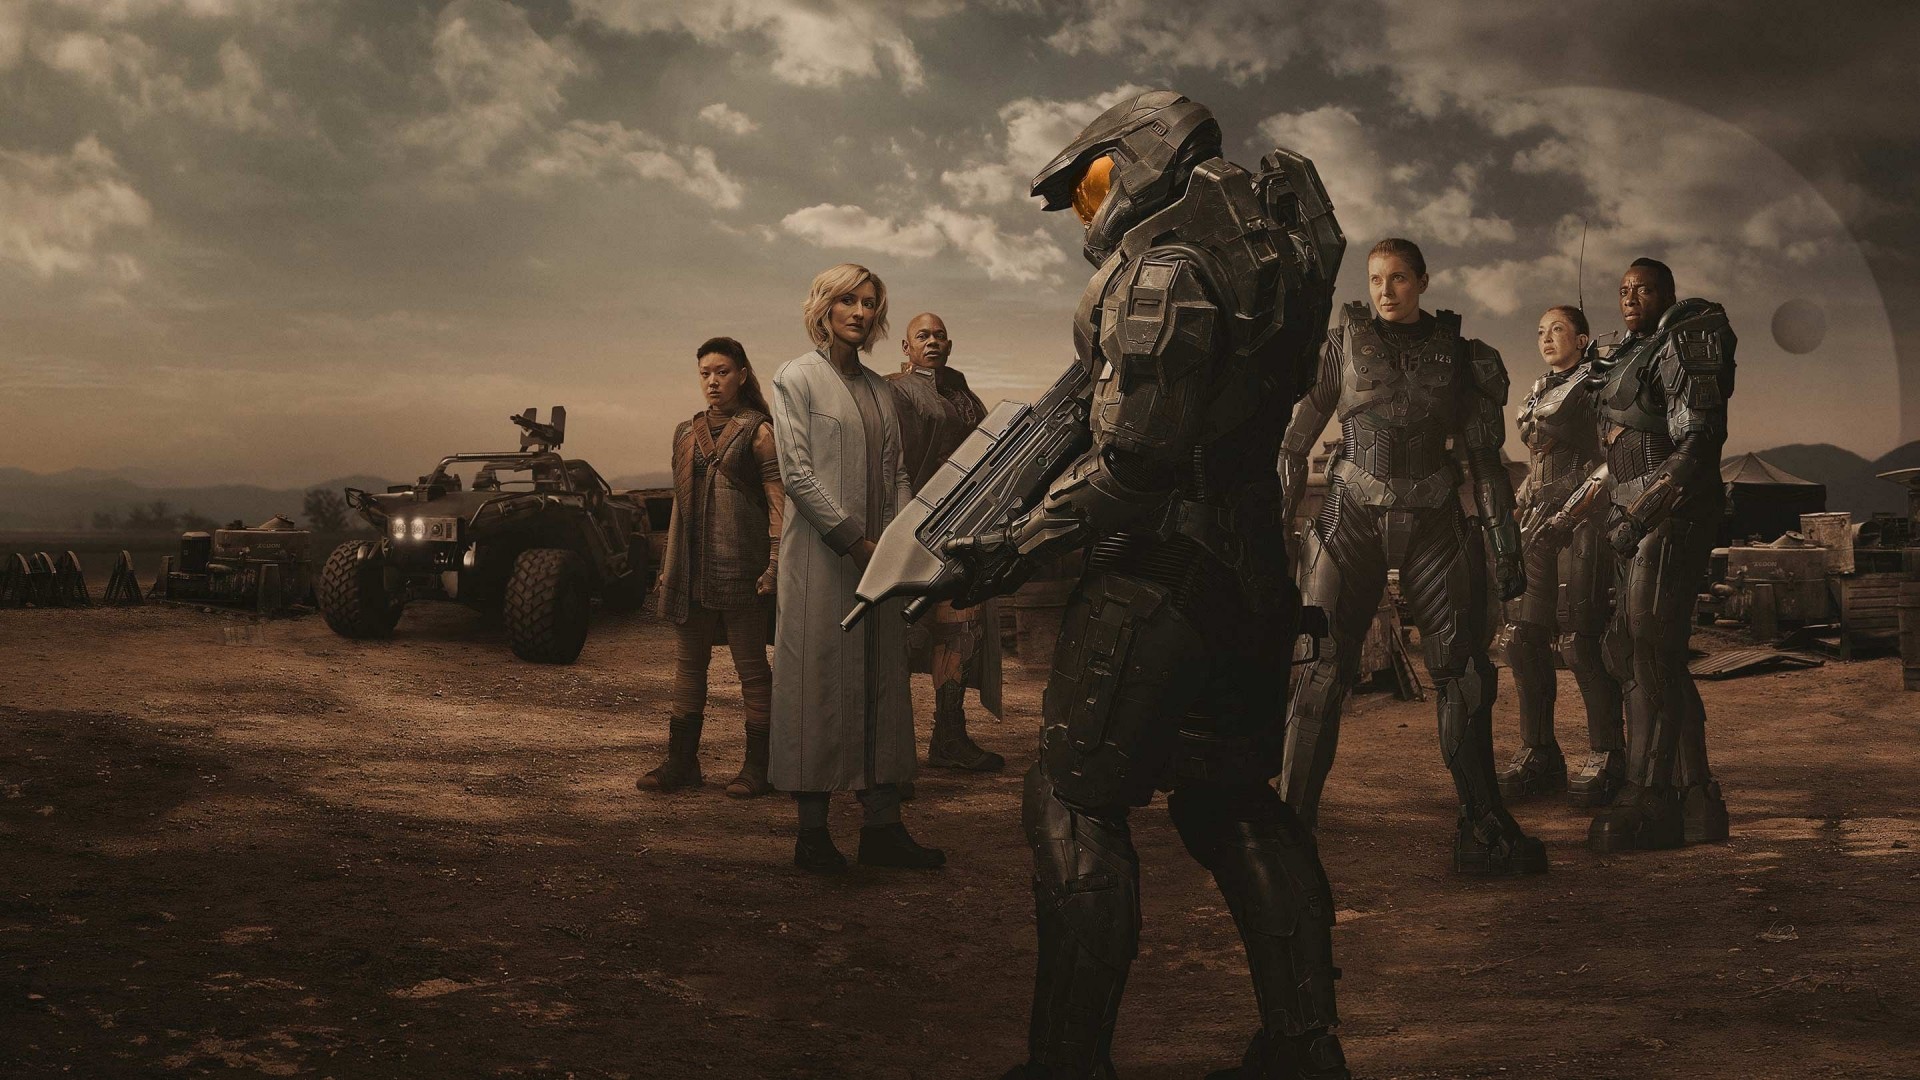 Second Halo Trailer from Paramount+ Introduces the Alien Threat